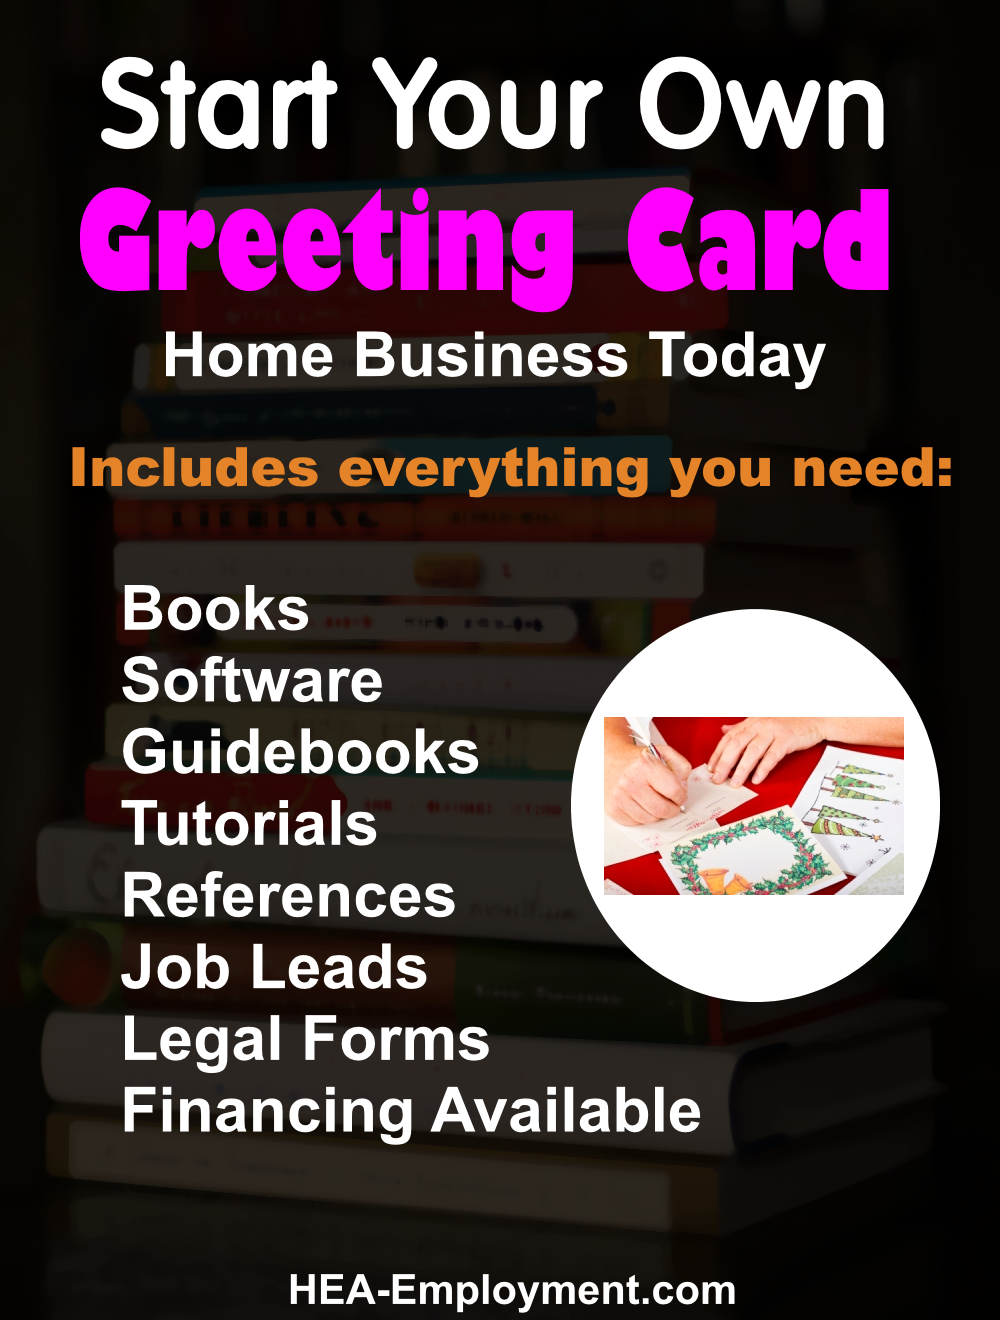 Start your own greeting card writing legitimate home based business. Fully equipped home business package with everything you need to get started. Productivity software, tutorials, guidebooks, references, manuals, tax advice and legal forms are included with each kit. Be your own boss!